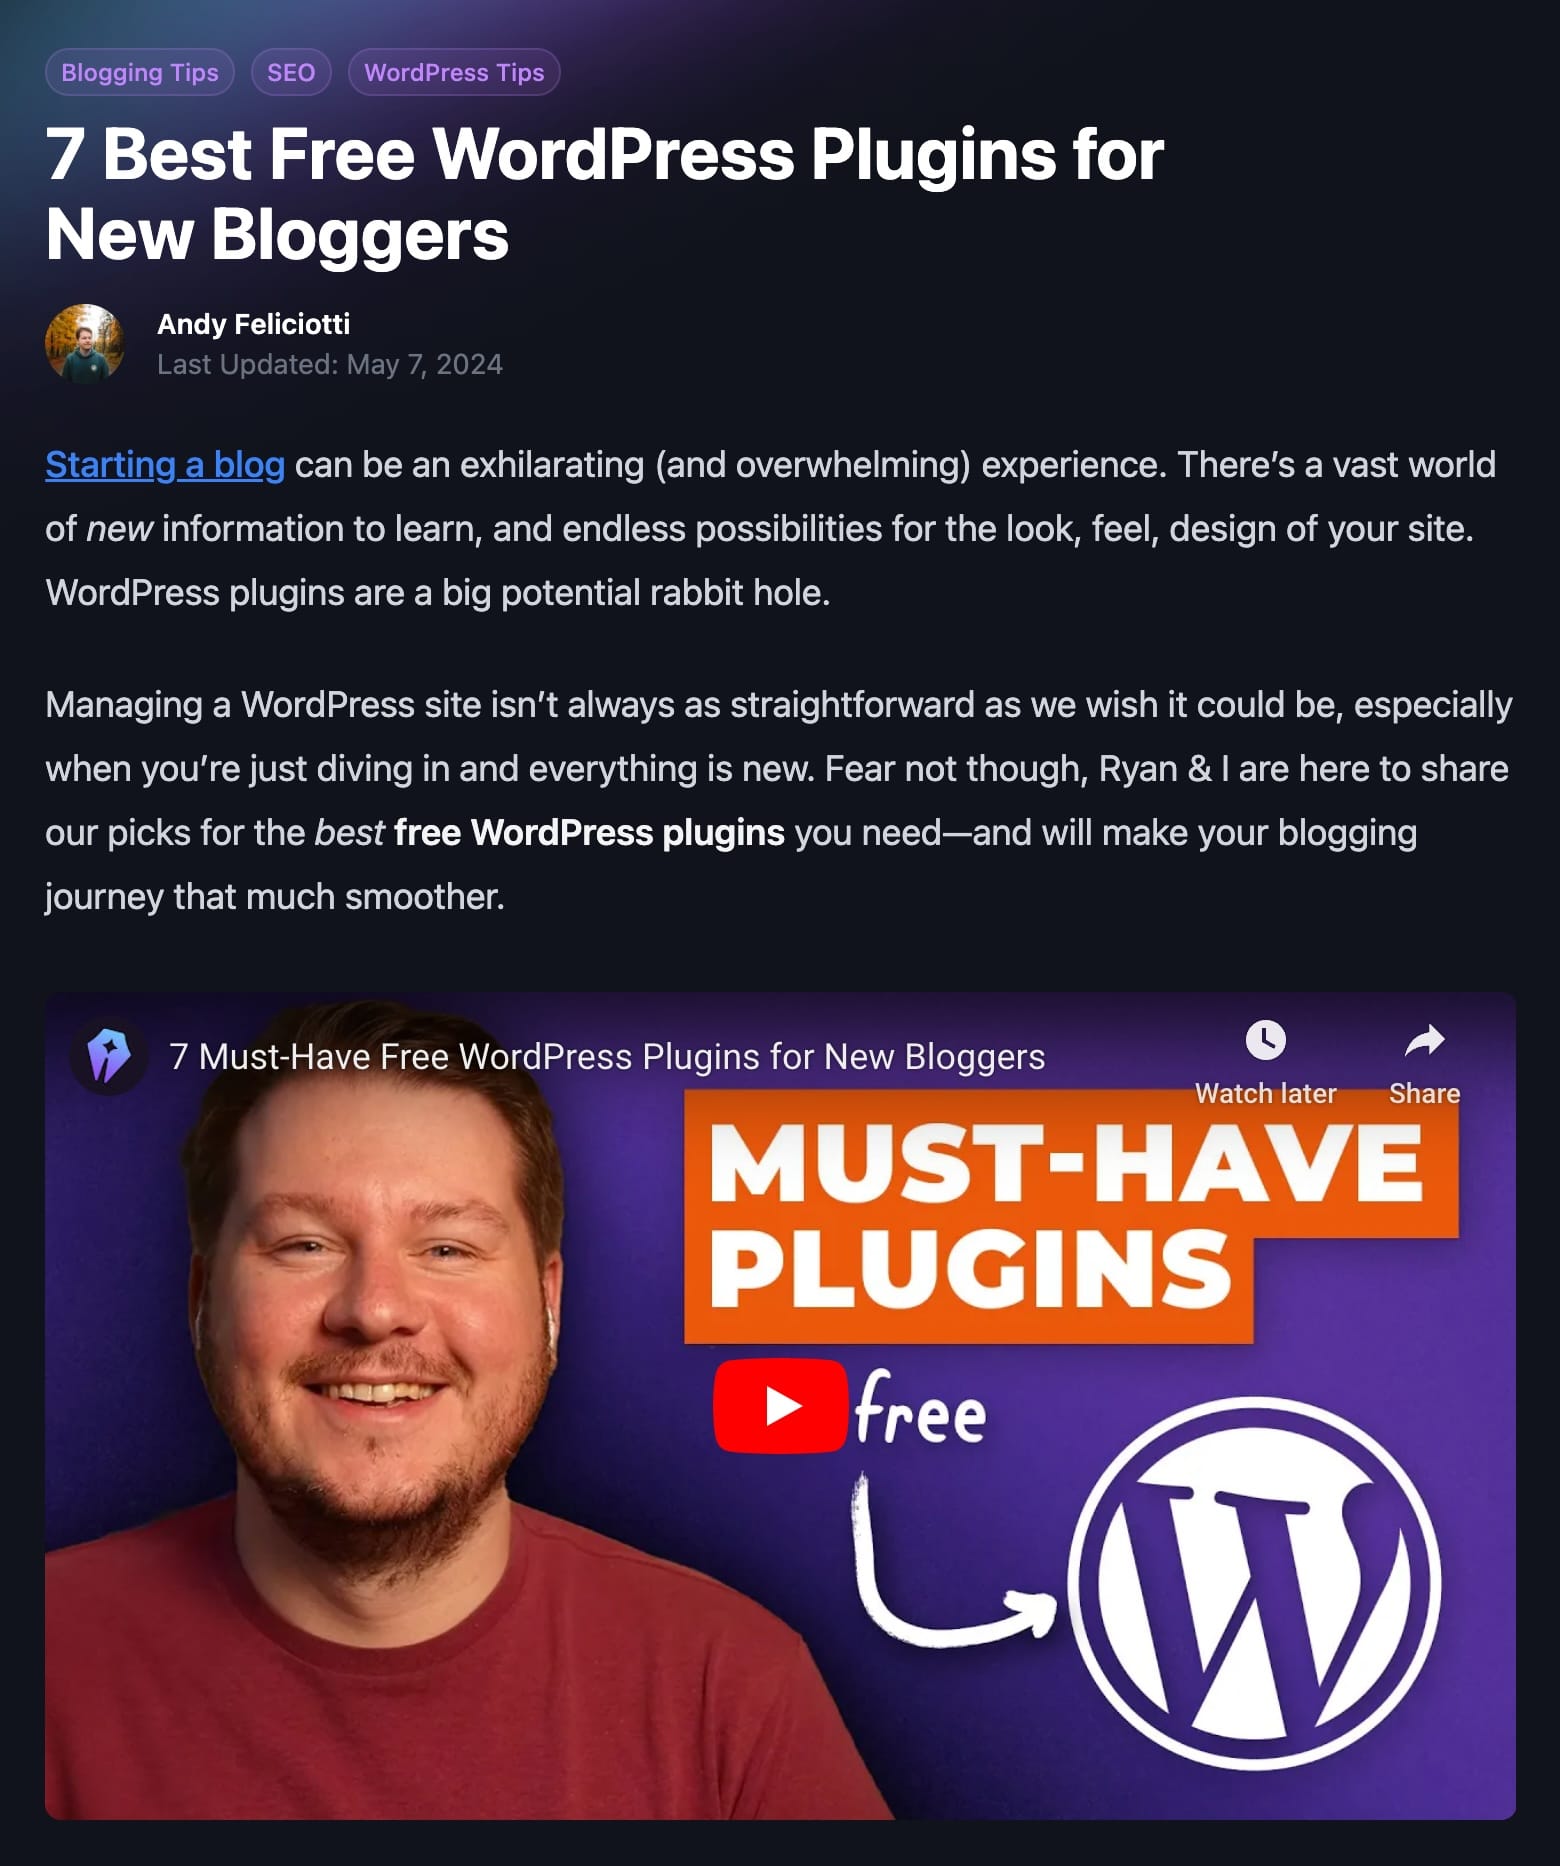 Simple History: Recognized as One of the Best Free Plugins for New Bloggers